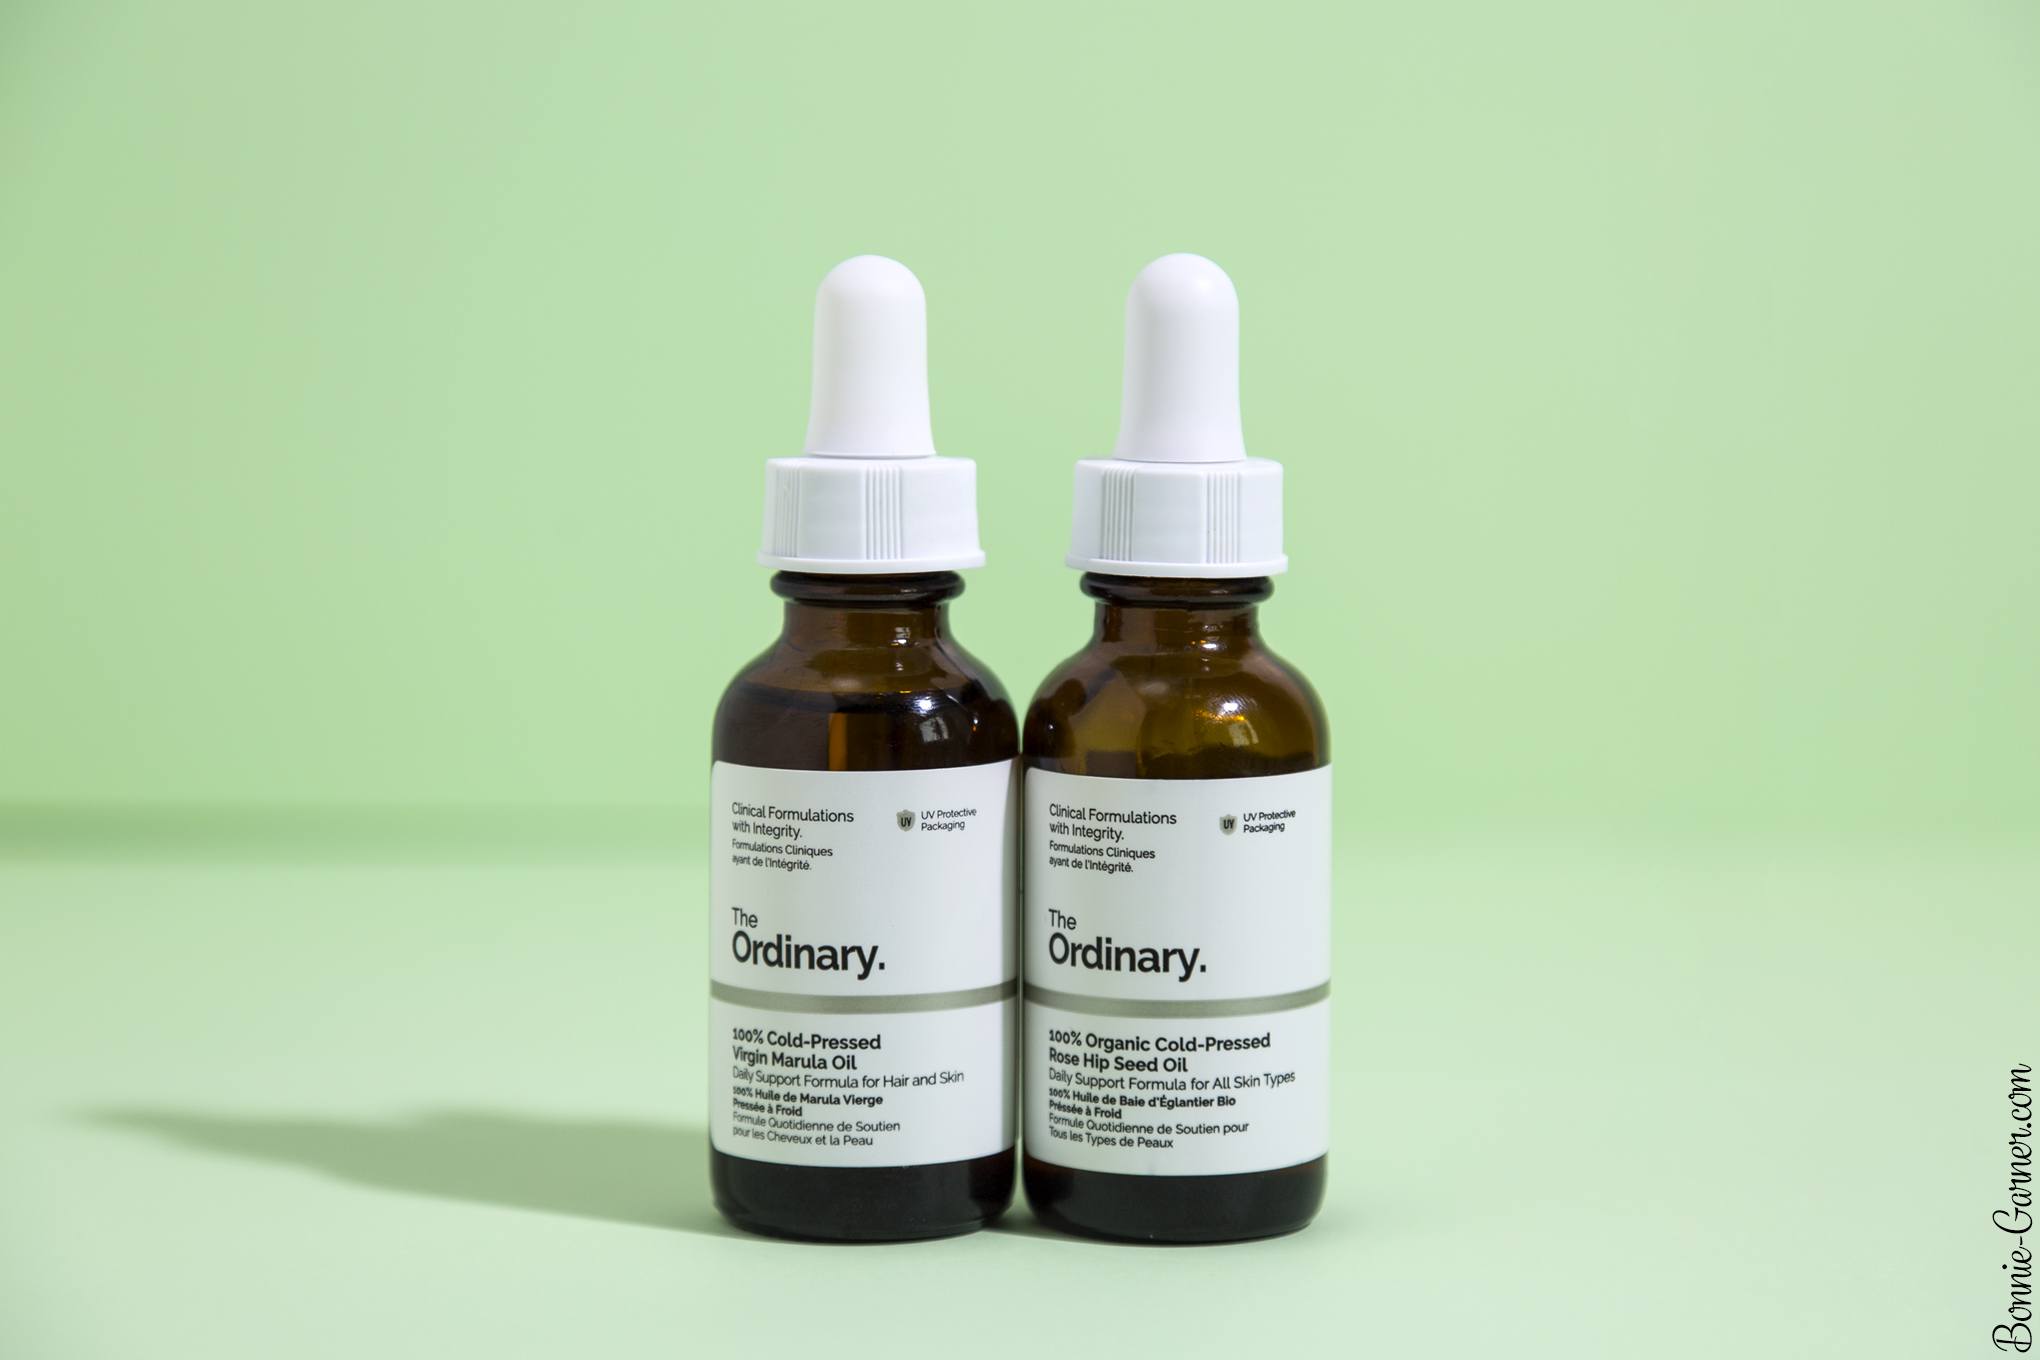 The Ordinary oils: Rose Hip Seed Oil & Marula Oil, my review | Bonnie Garner Skincare, makeup, nails